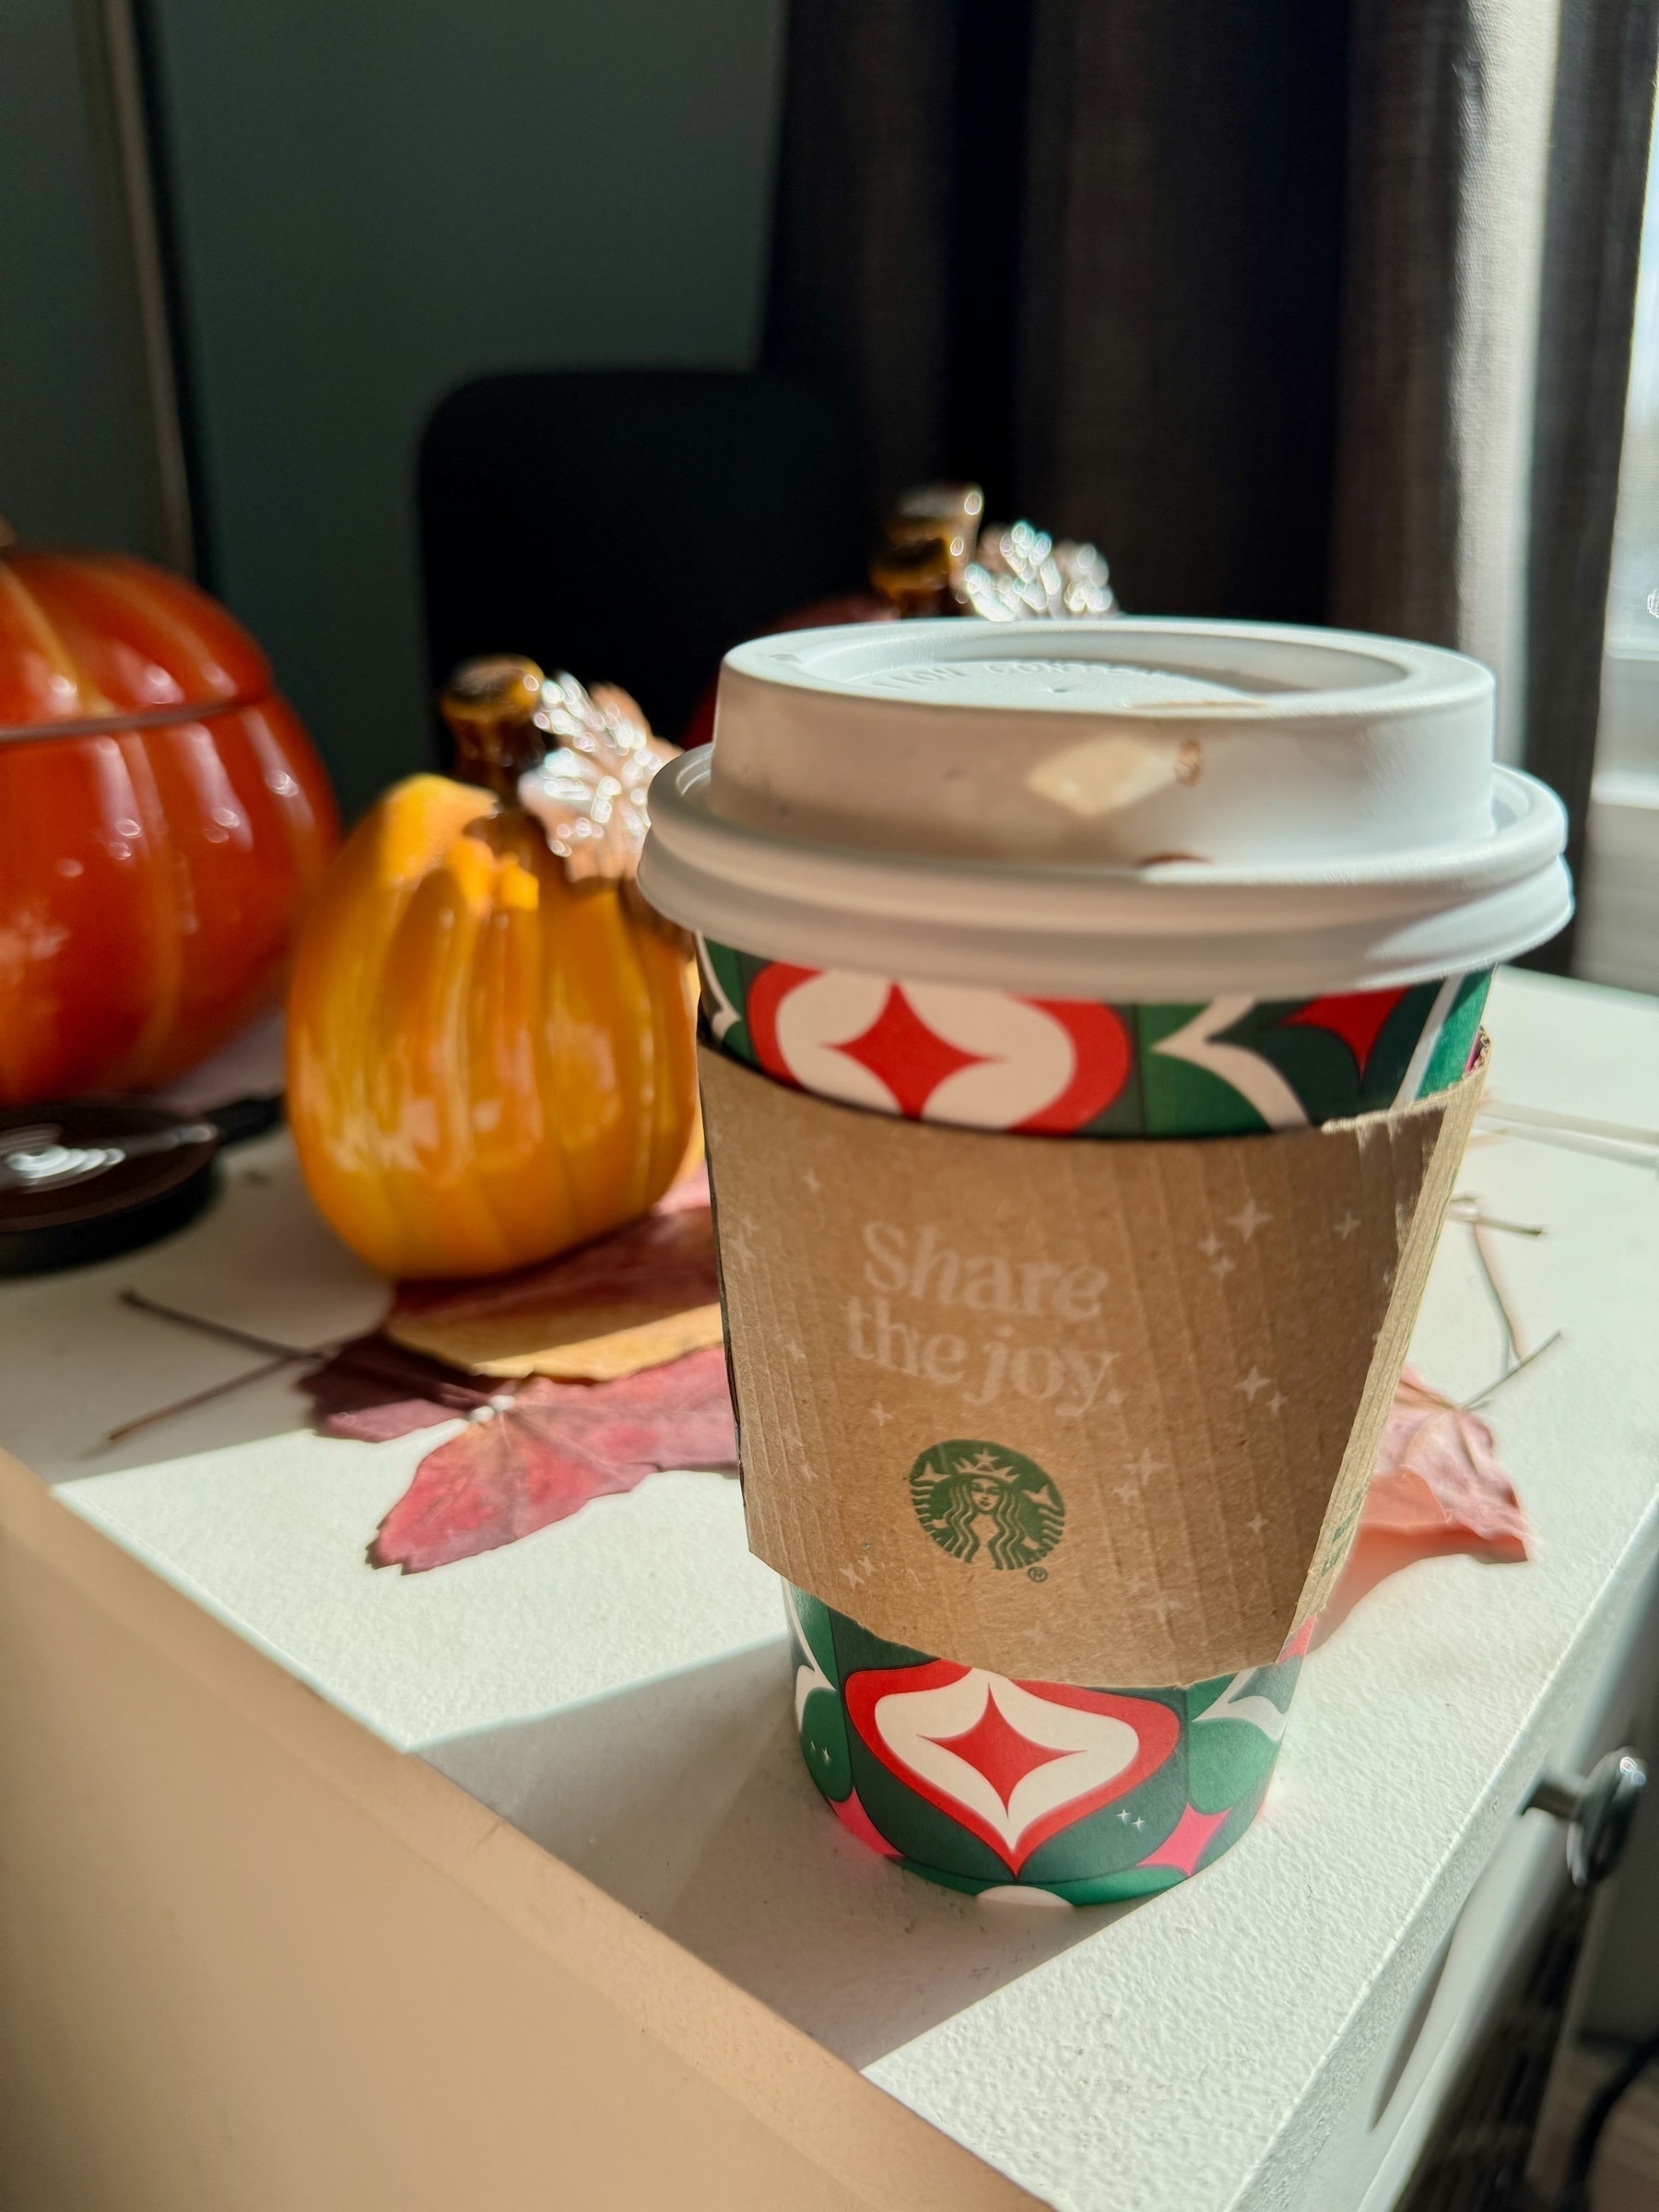 Paper coffee cup, with a Starbucks heat-sleeve, on a table, with ceramic pumpkins in the background and a wireless charging puck.